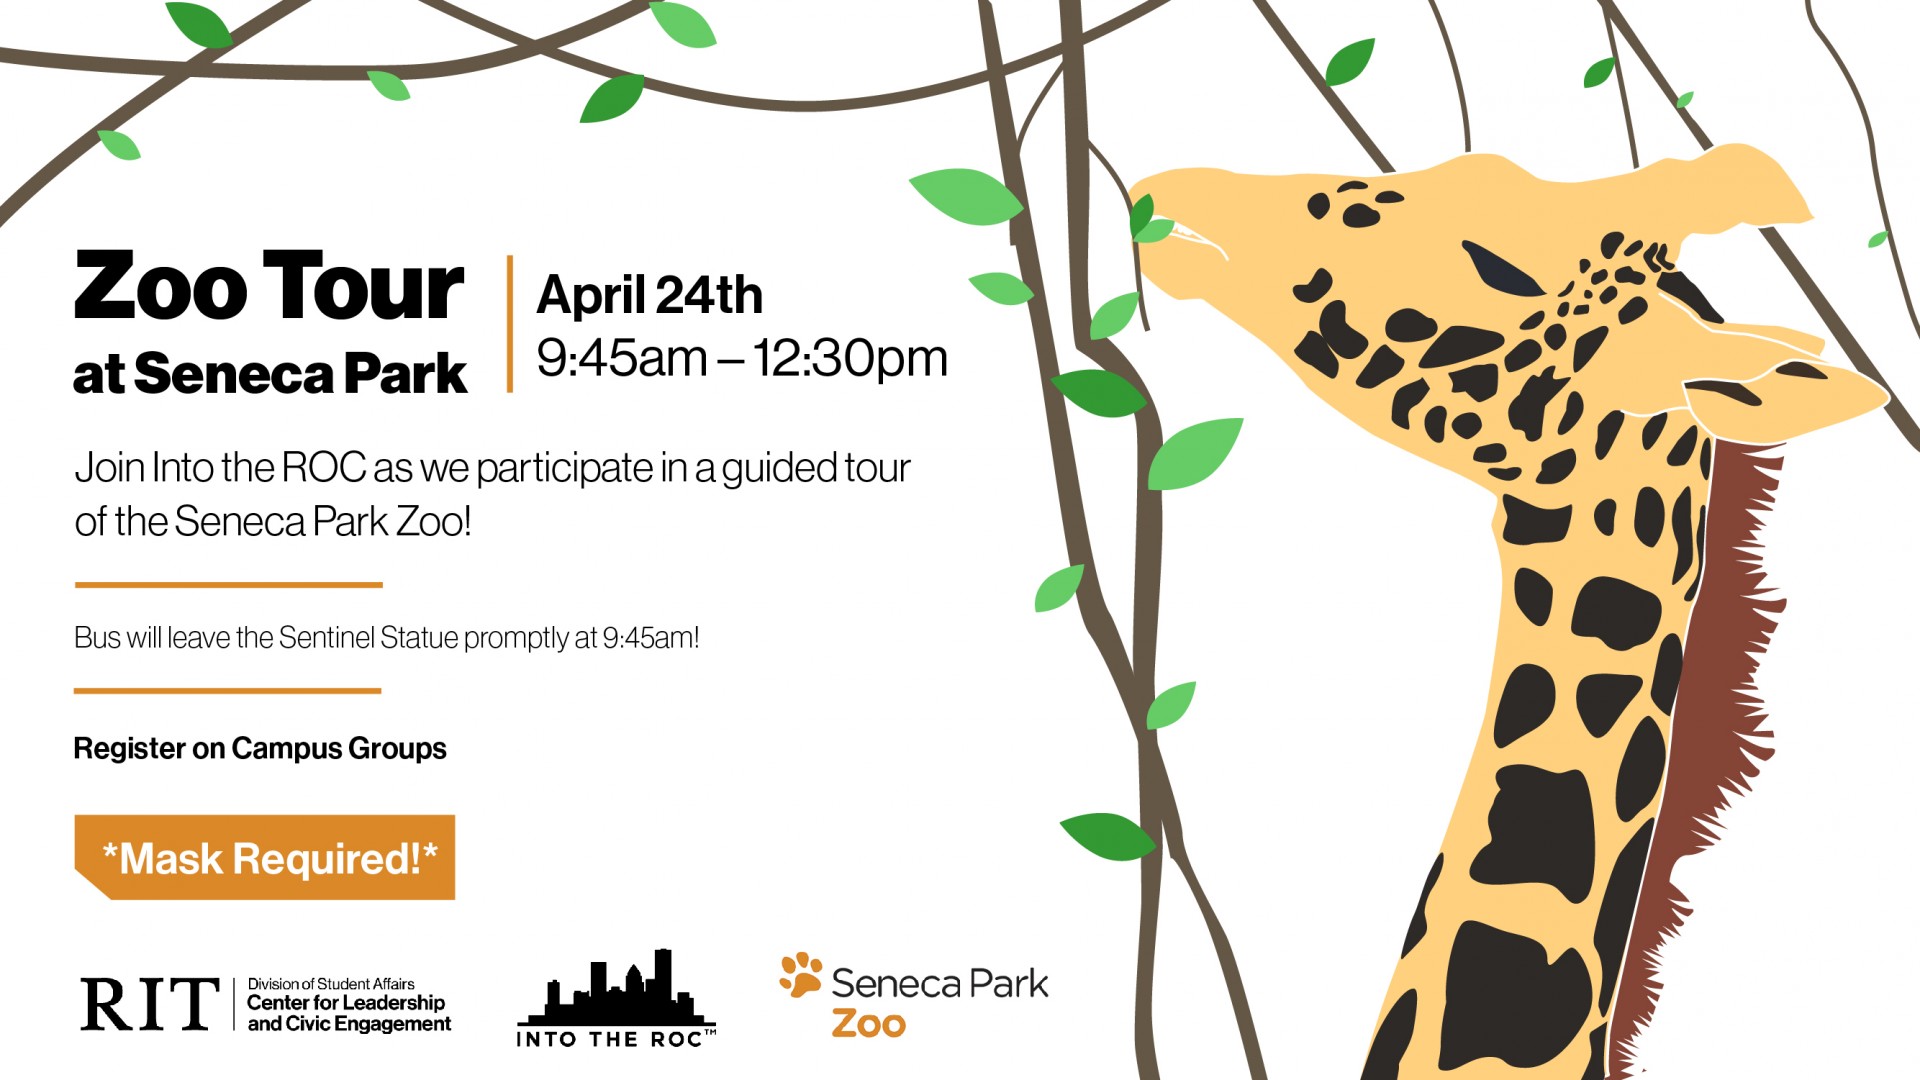 On the right side of the flyer, a giraffe lazily eats leaves hanging from a vine. To the left of the giraffe are the details of the event.